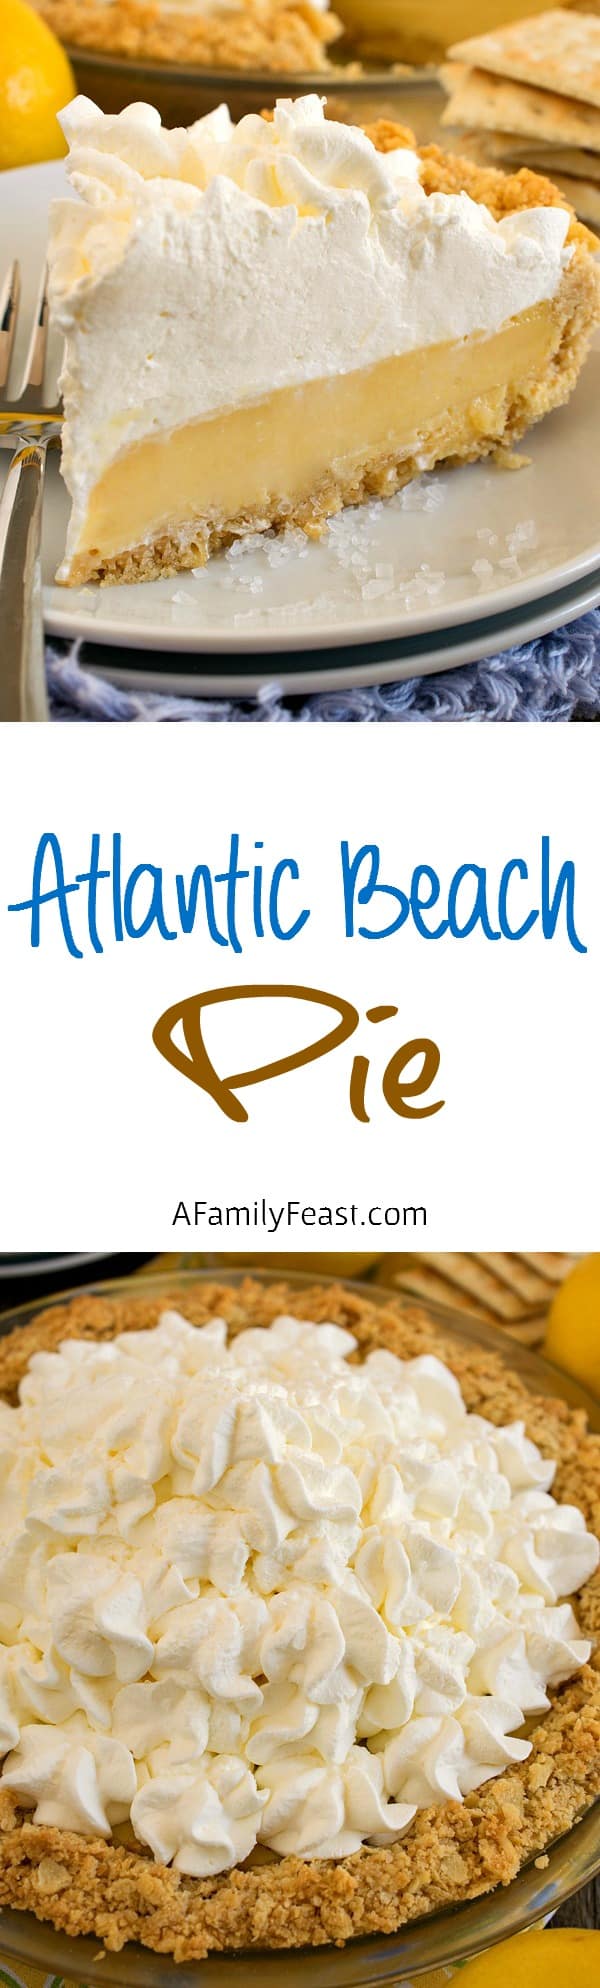 Atlantic Beach Pie - A uniquely delicious lemony custard pie, topped with whipped cream in a saltine cracker crust. A perfect salty-sweet dessert!